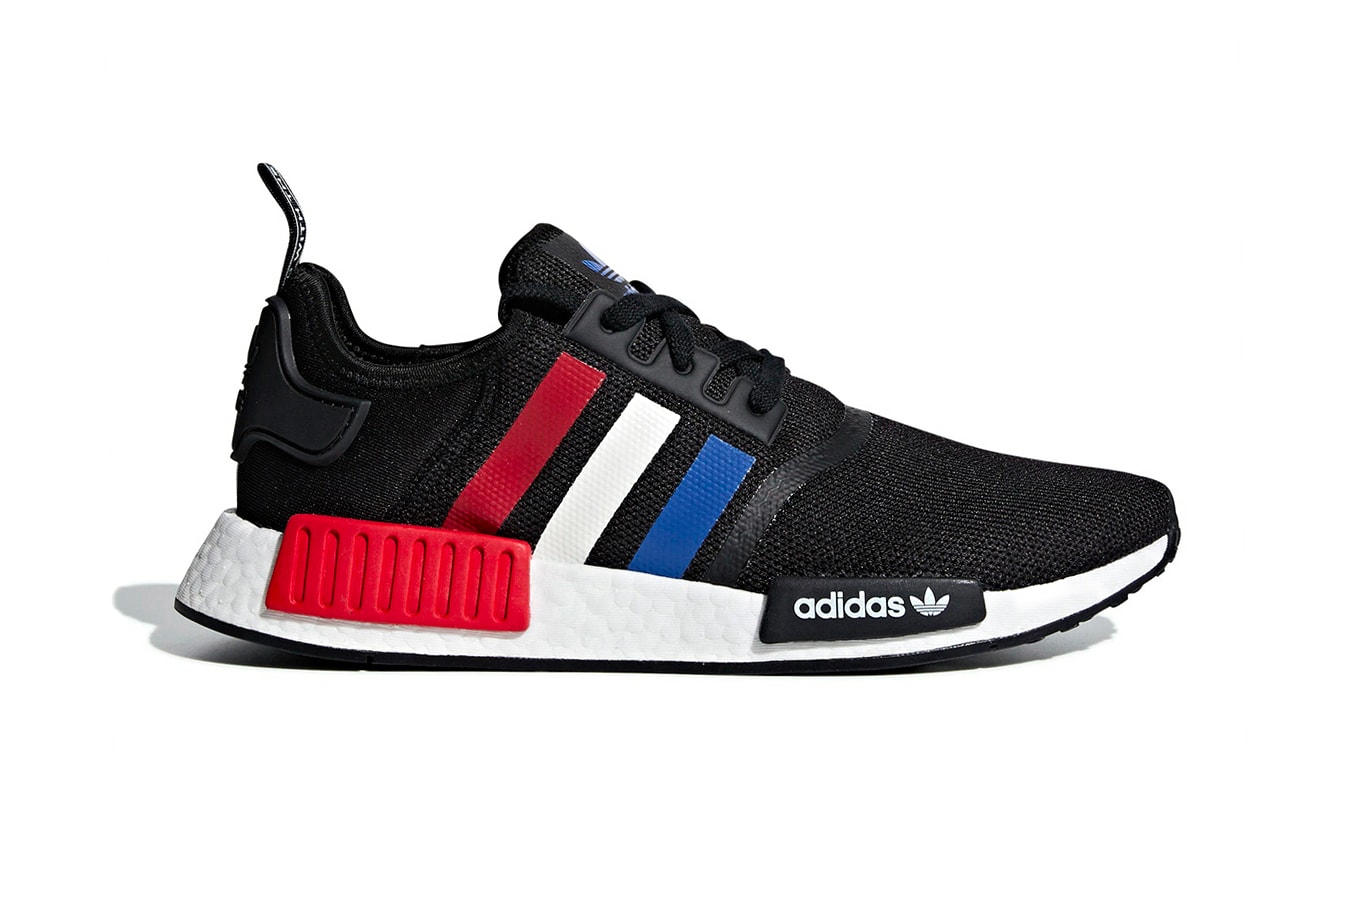 adidas NMD R1 black red white blue release info sneakers